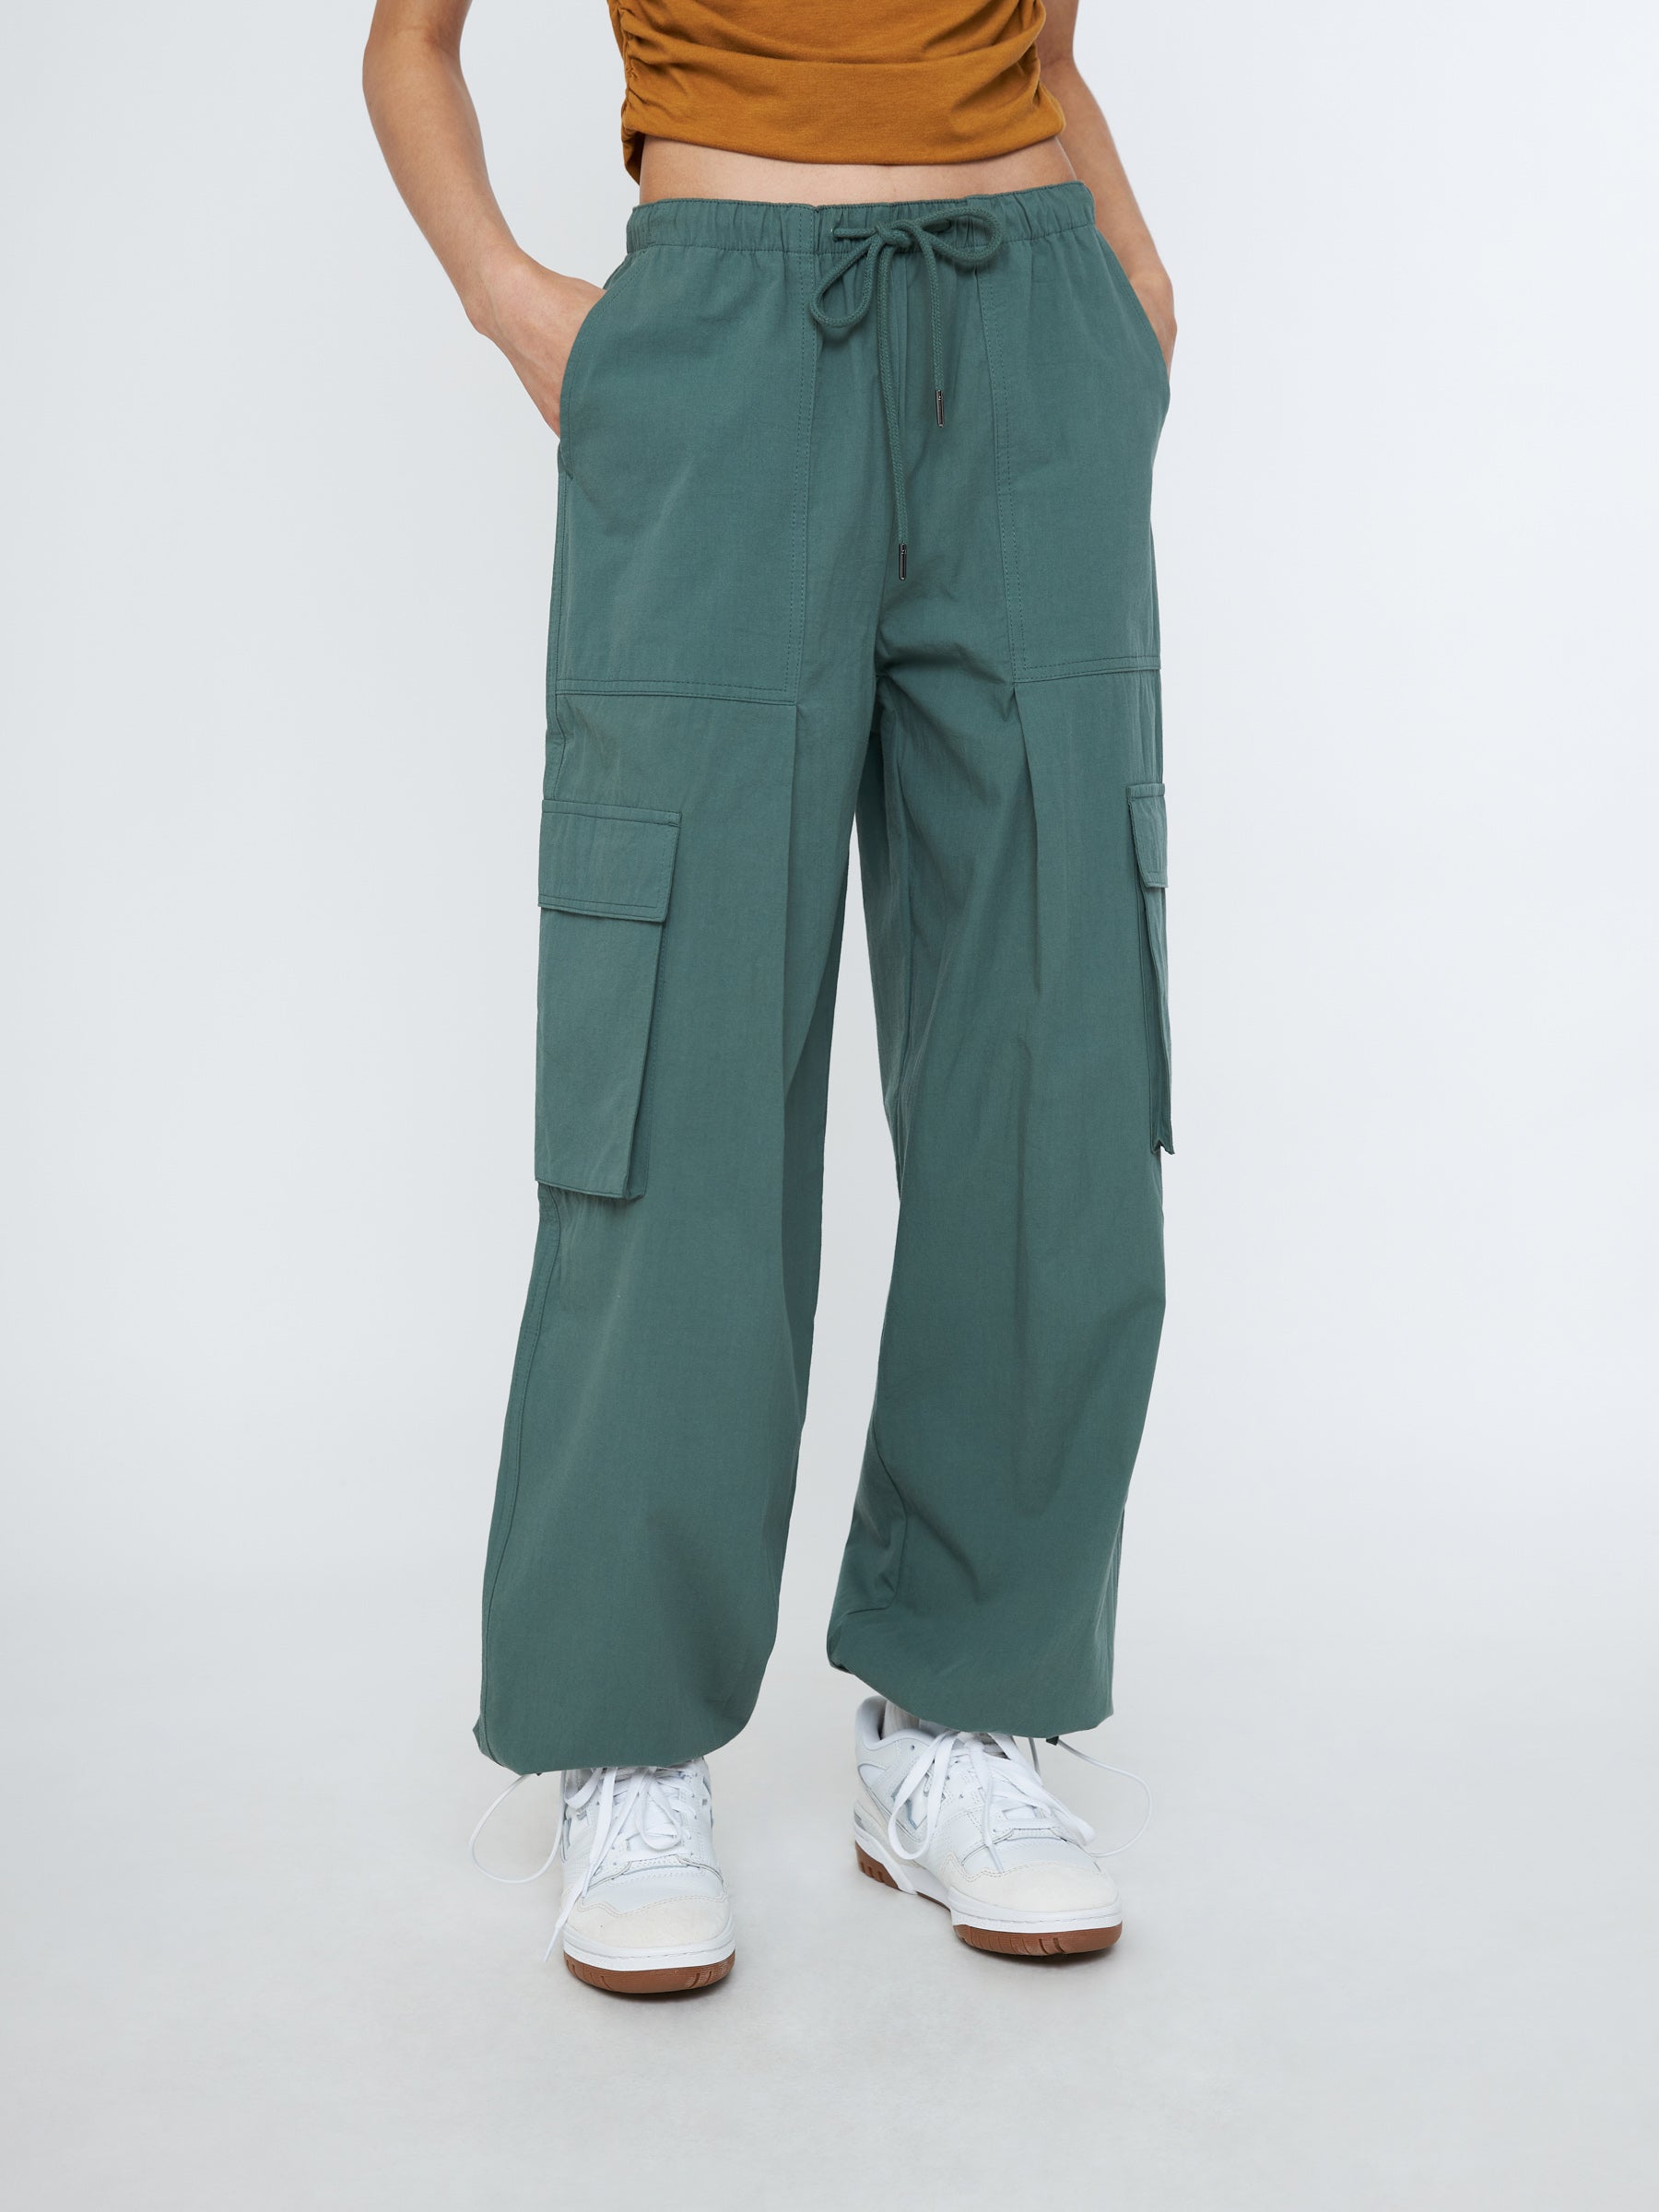 H&M Women Canvas Cargo Trousers - Price History